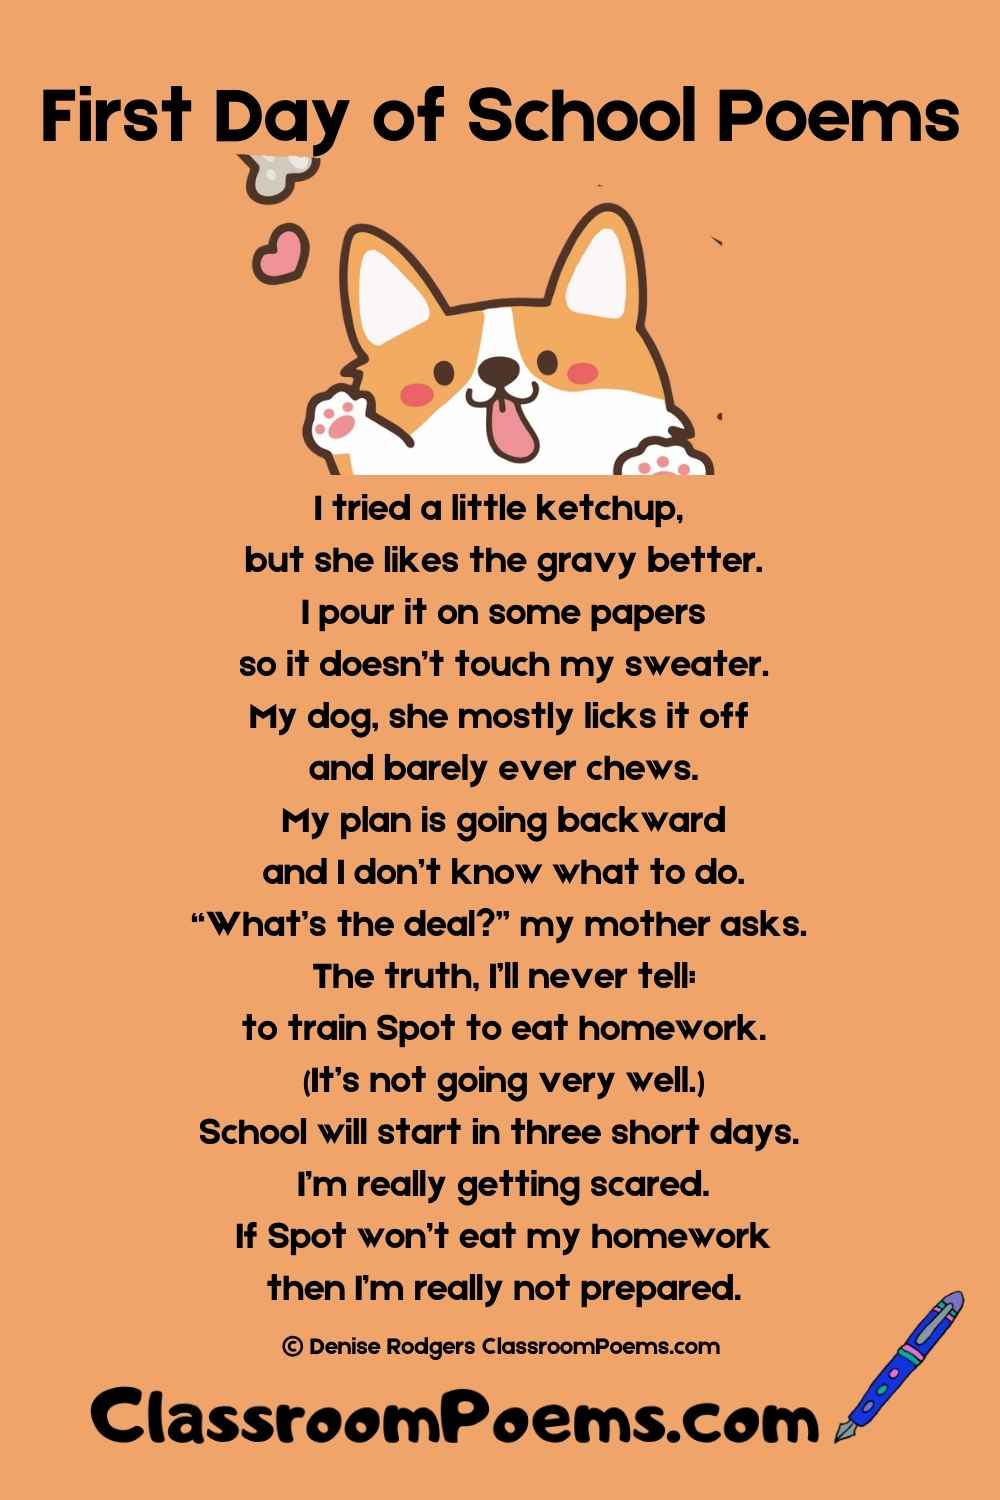 First Day of School Poems by Denise Rodgers on ClassroomPoems.com.